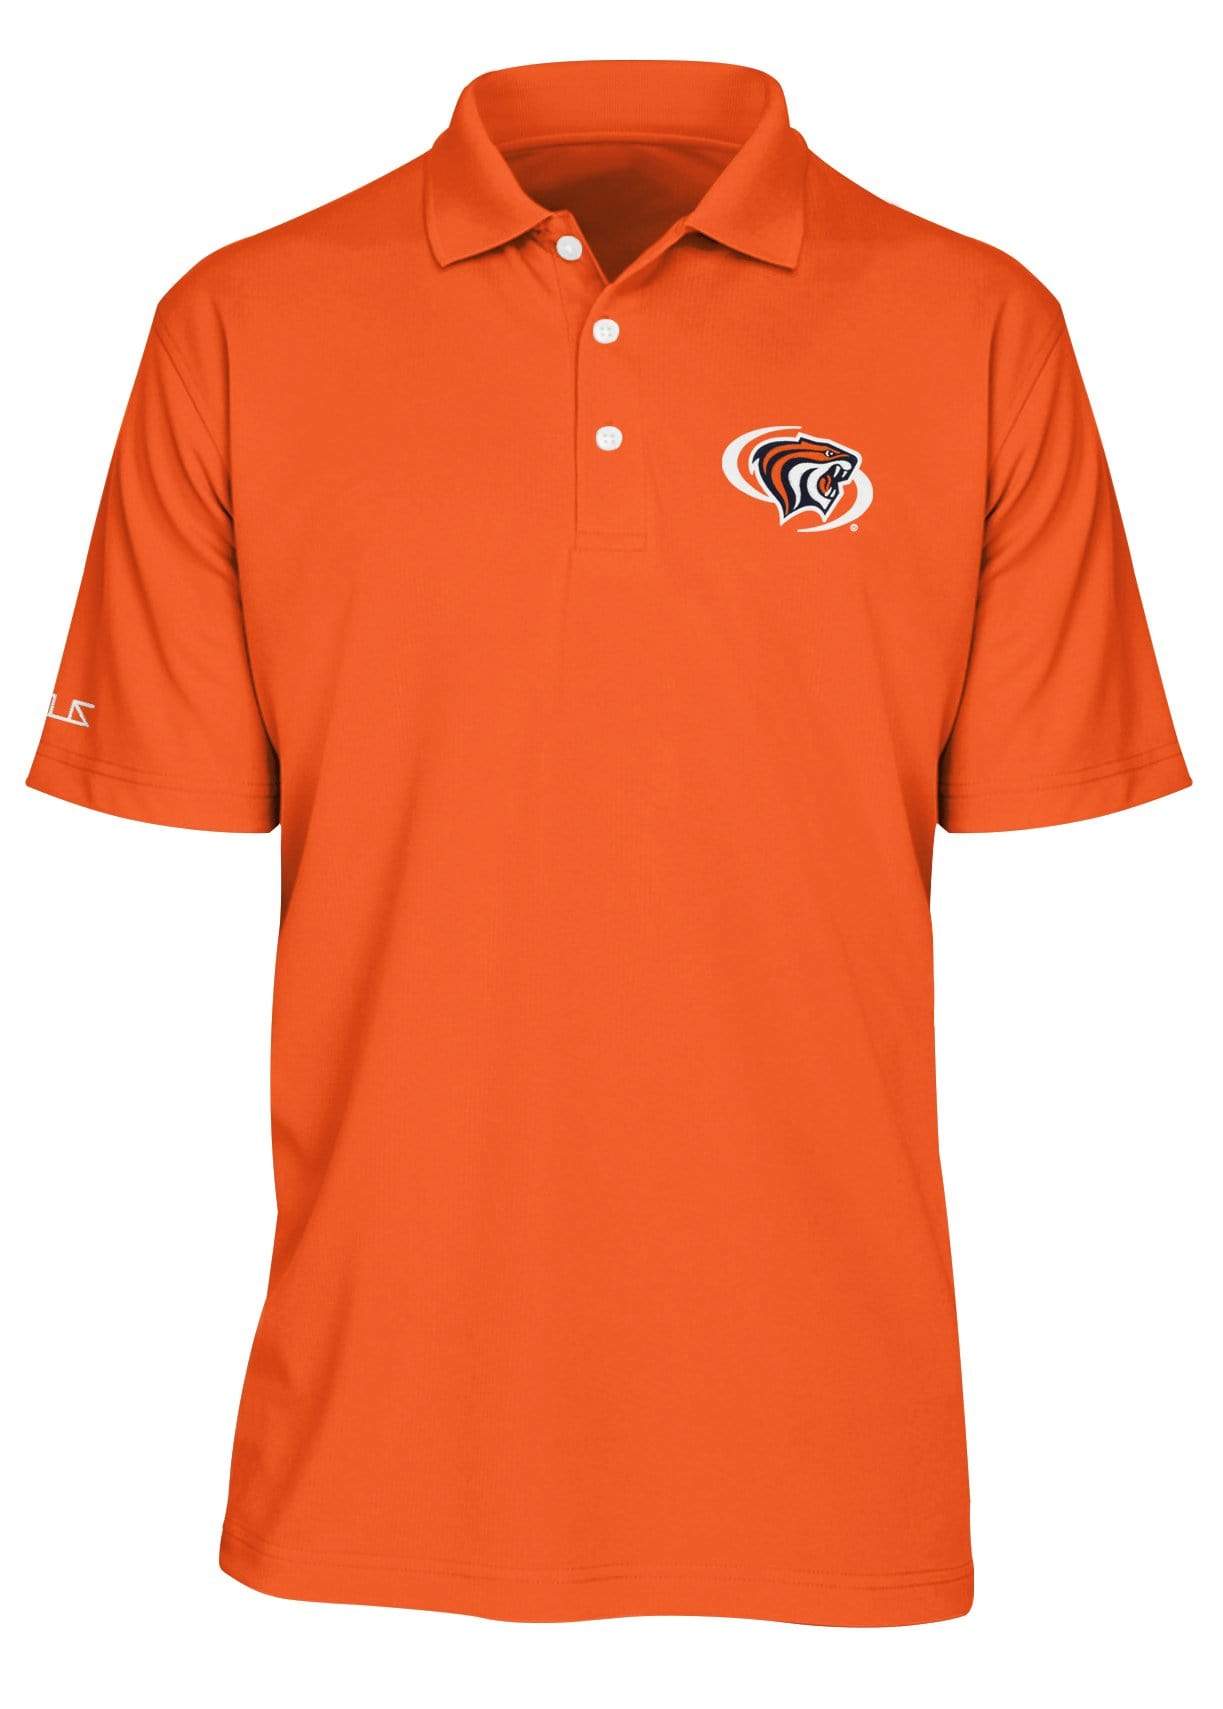 University of the Pacific Tigers Powercat Performance Polo Shirt by Zeus Collegiate